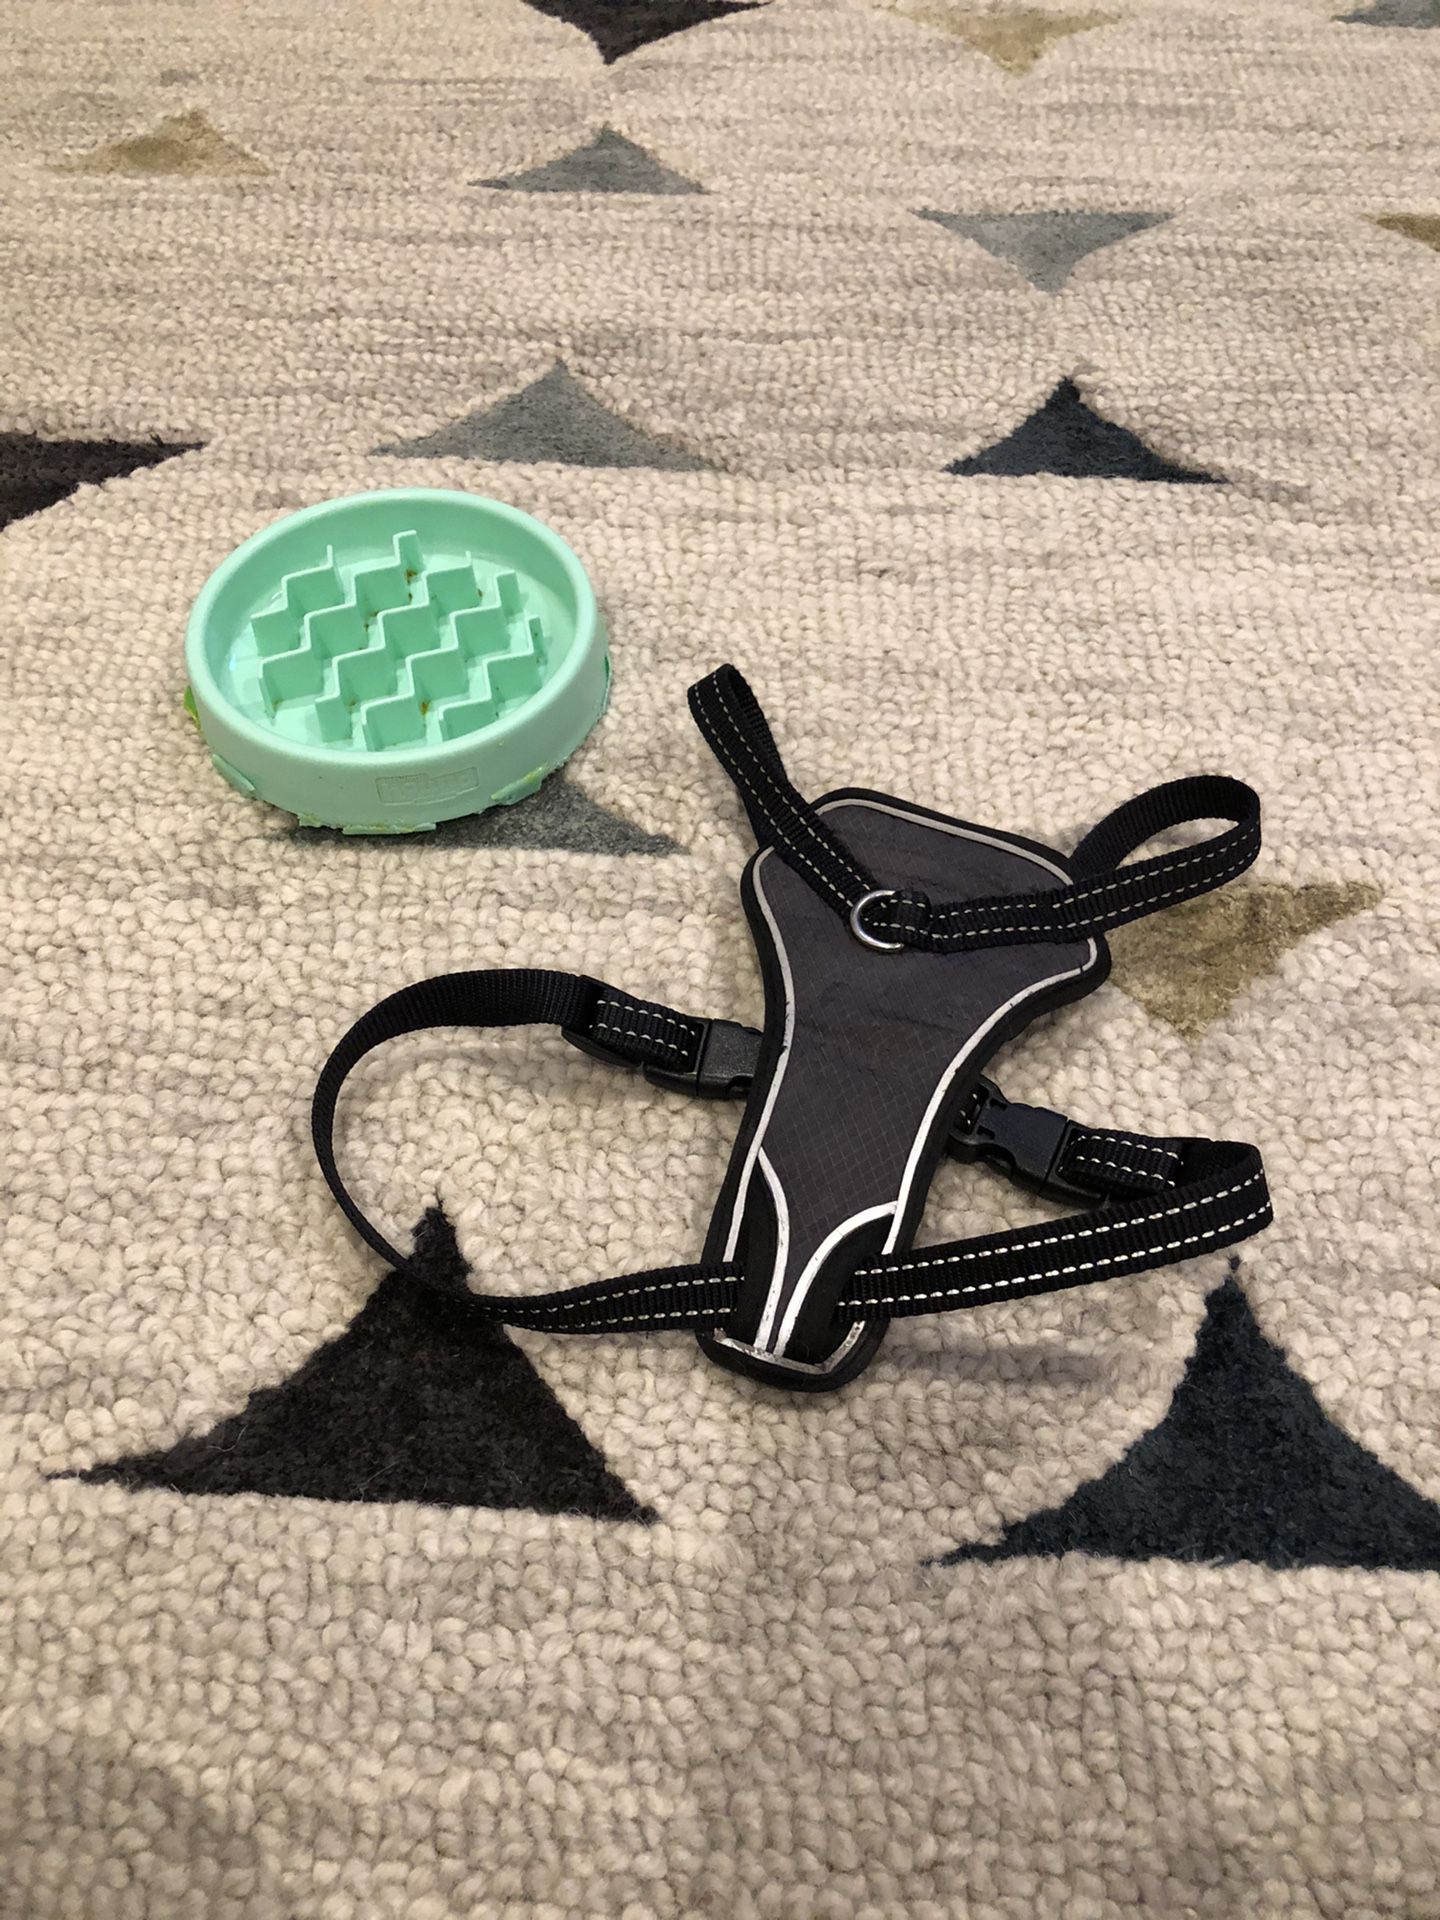 Small Dog harness and slow feed bowl